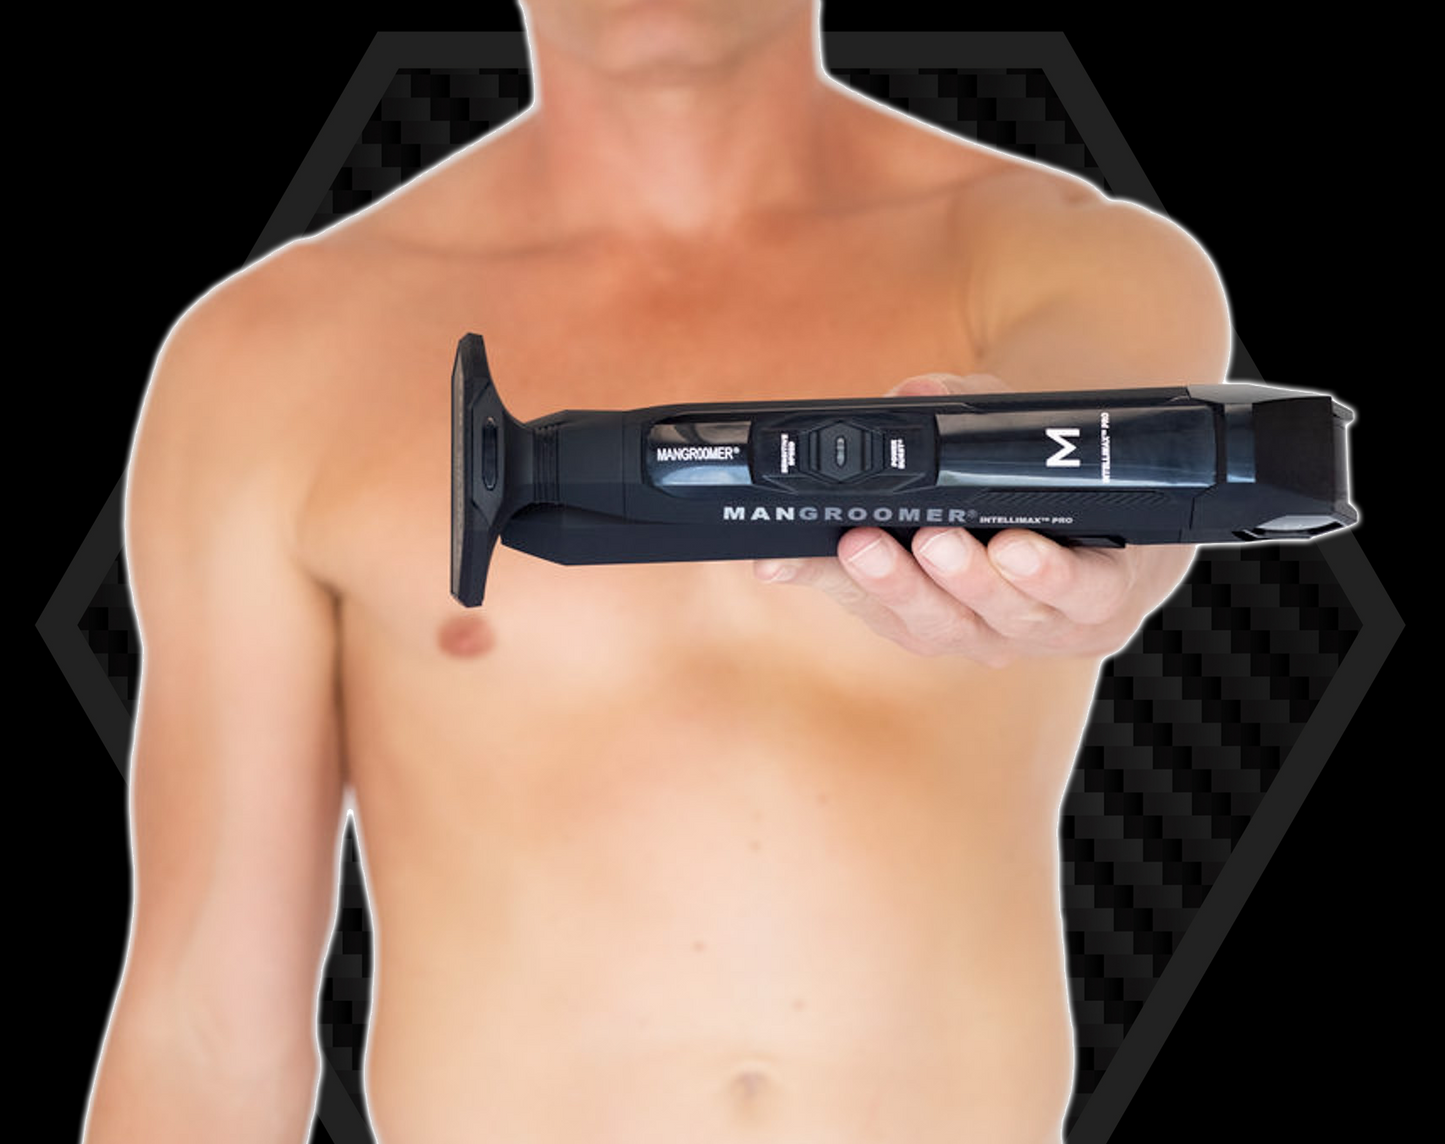 INTELLIMAX™ PRO Back Hair Shaver with 2 Shock Absorber Flex Heads, Power Hinge, Extreme Reach Handle and Advanced 2.7" Extra-Wide Blade Design